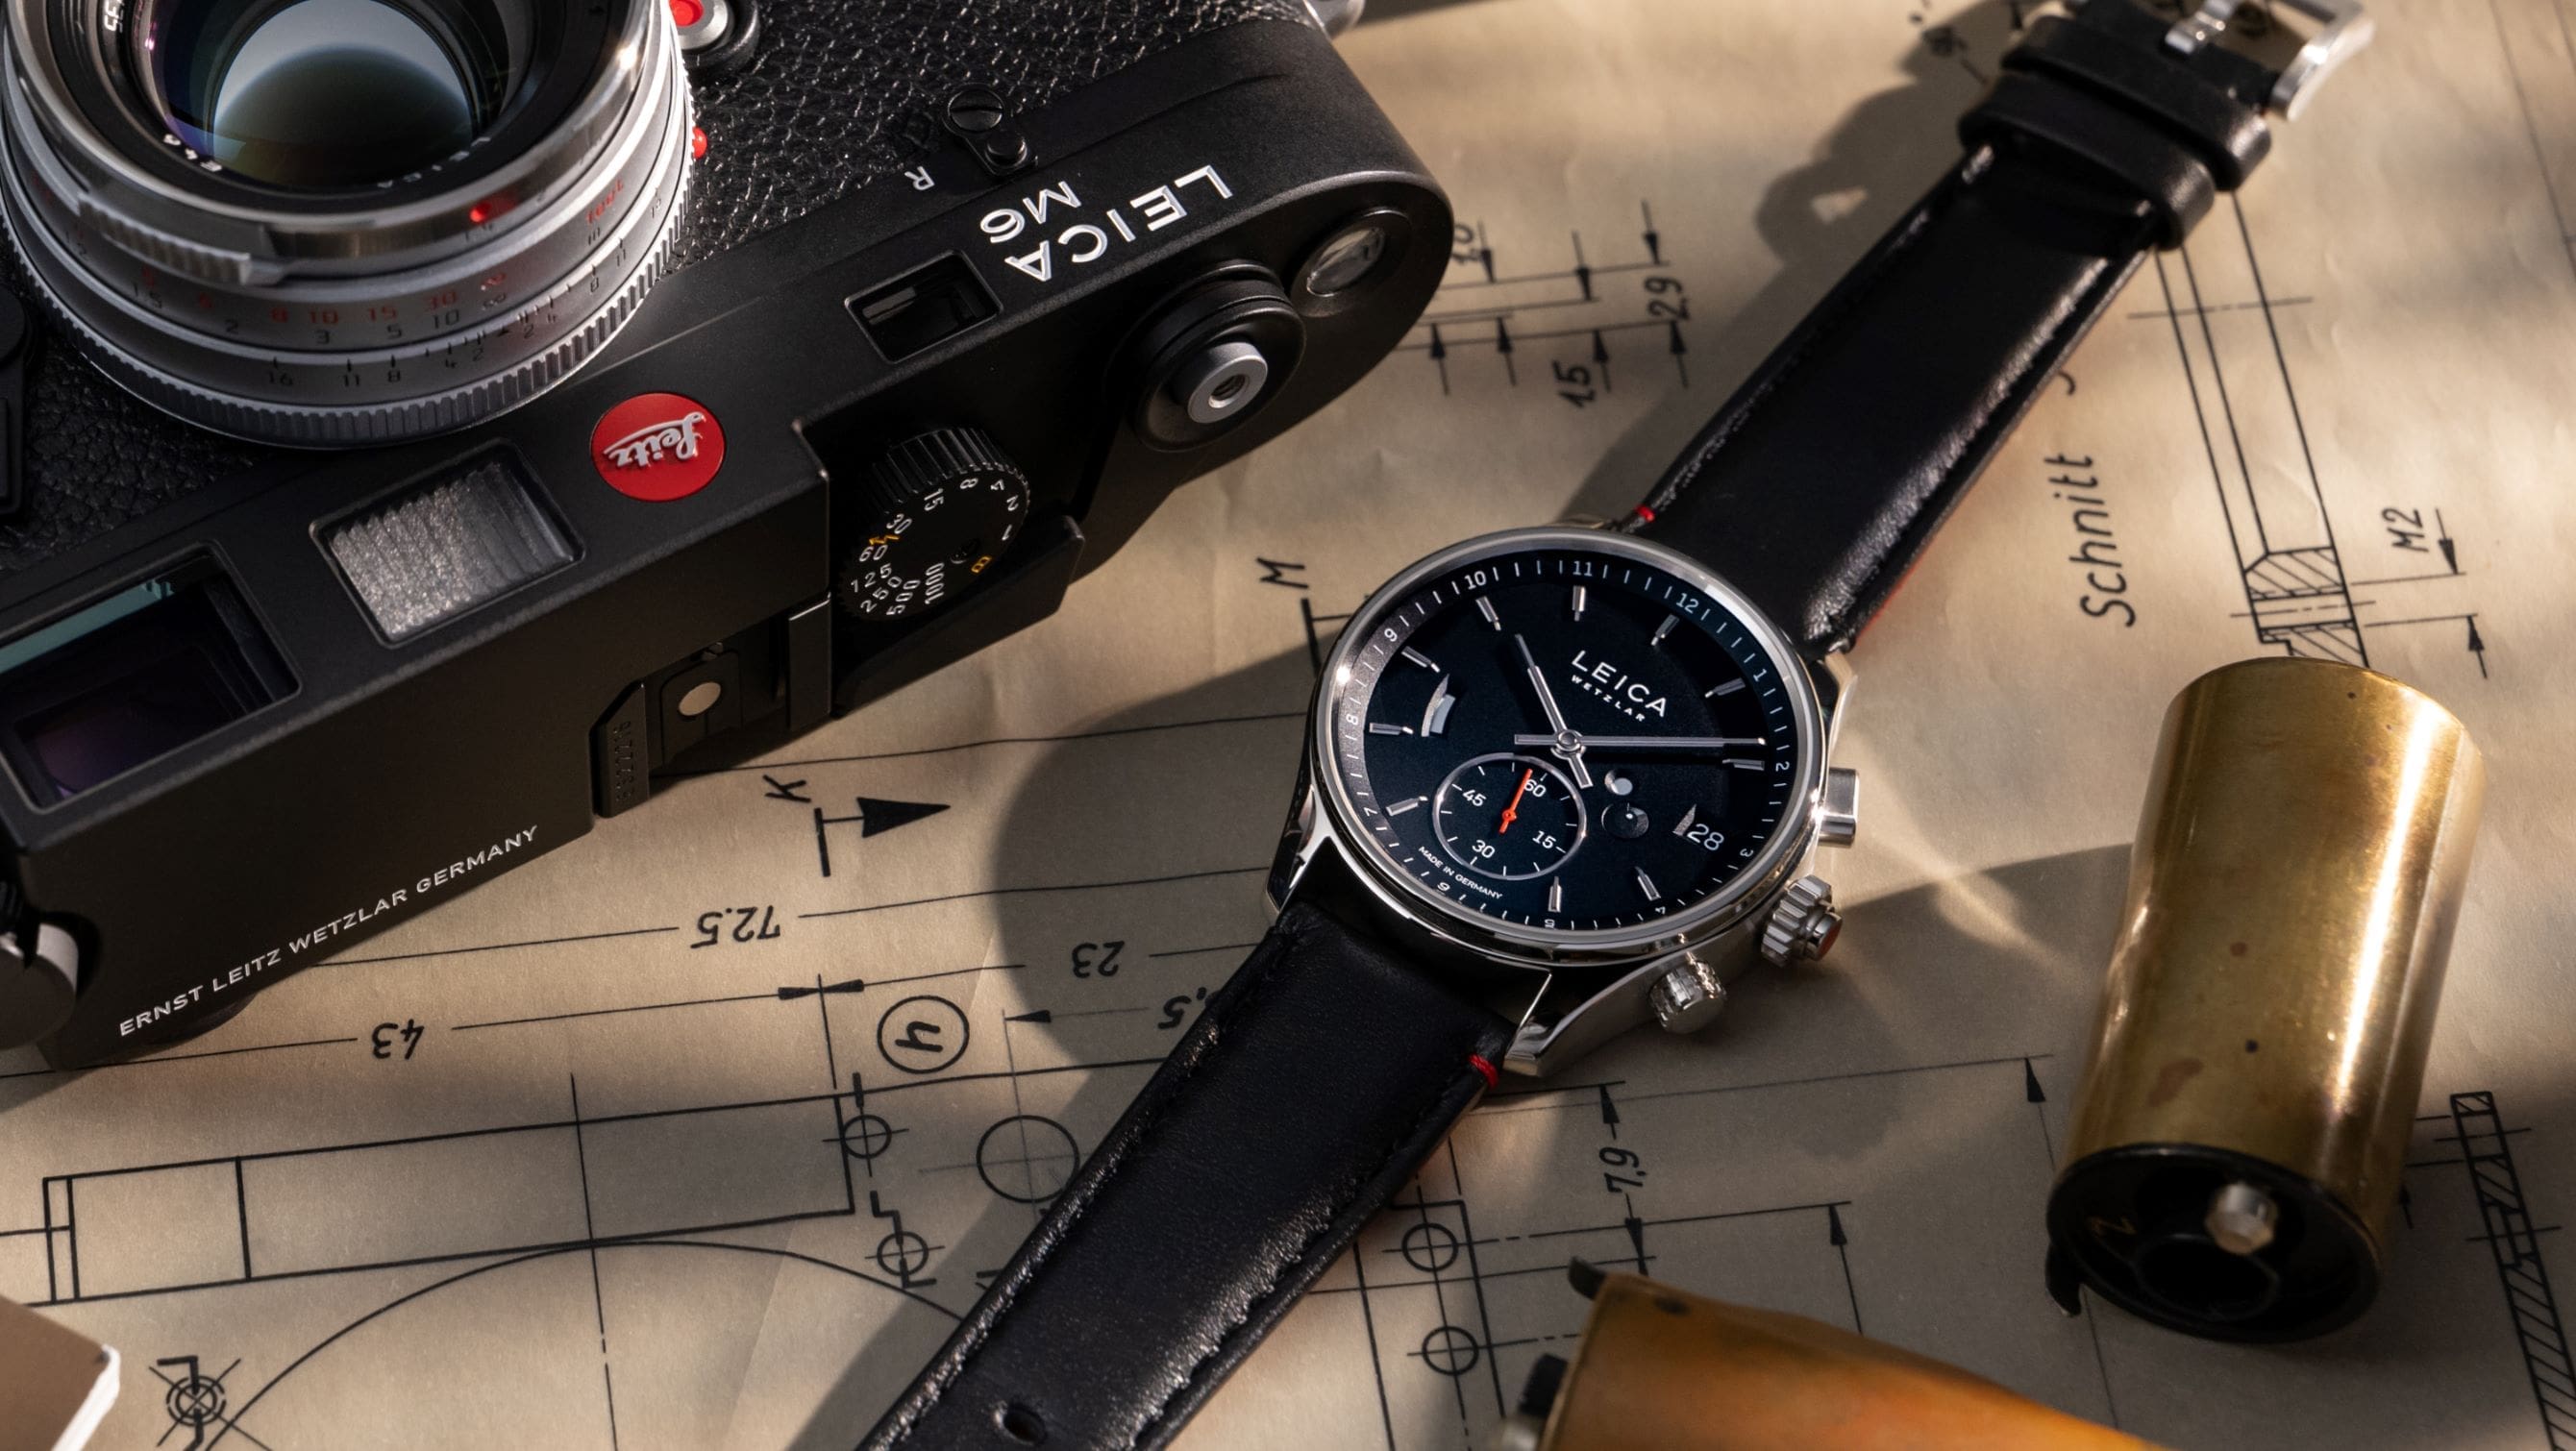 Leica Cameras Is Now Making Luxury Watches – Robb Report